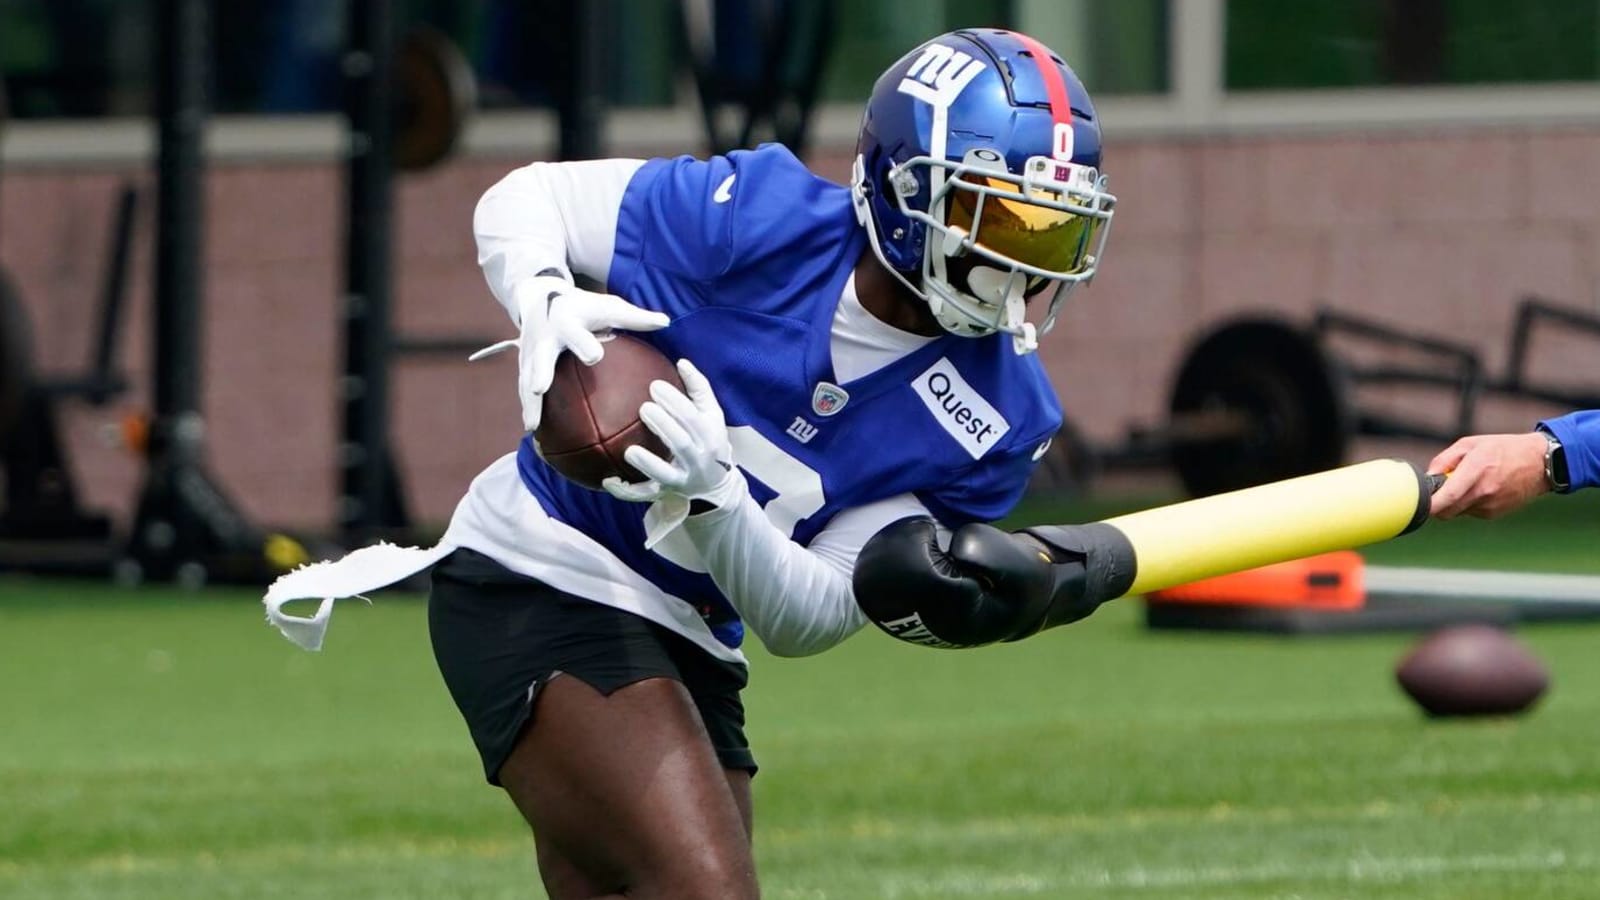 Giants experimenting with WR as RB in Saquon Barkley’s absence